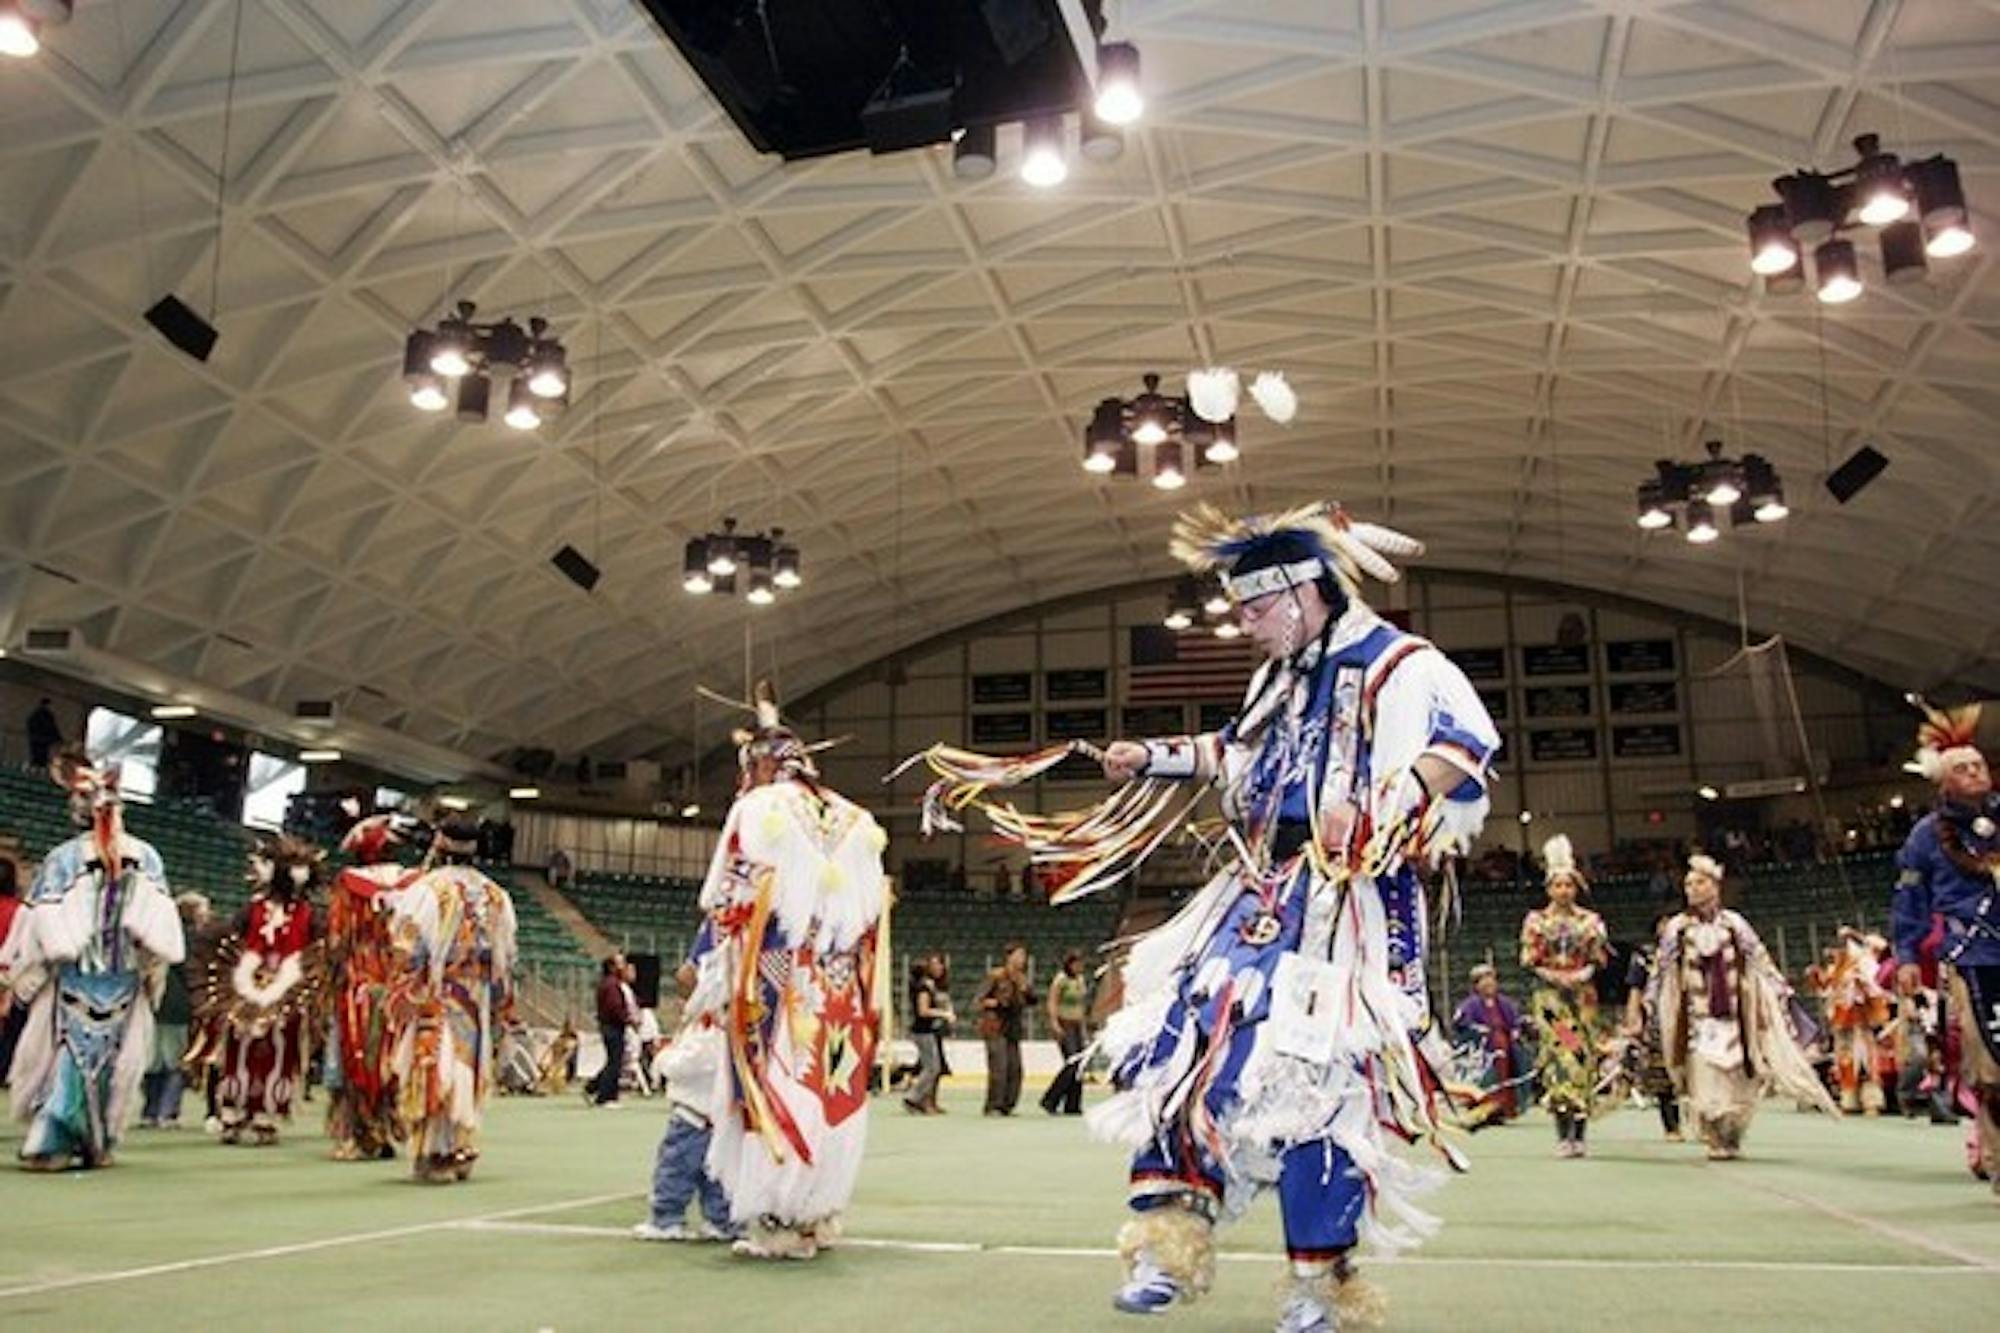 Native Americans from more than 50 different tribes danced together at Dartmouth's 34th Annual Pow-Wow this past Saturday and Sunday.